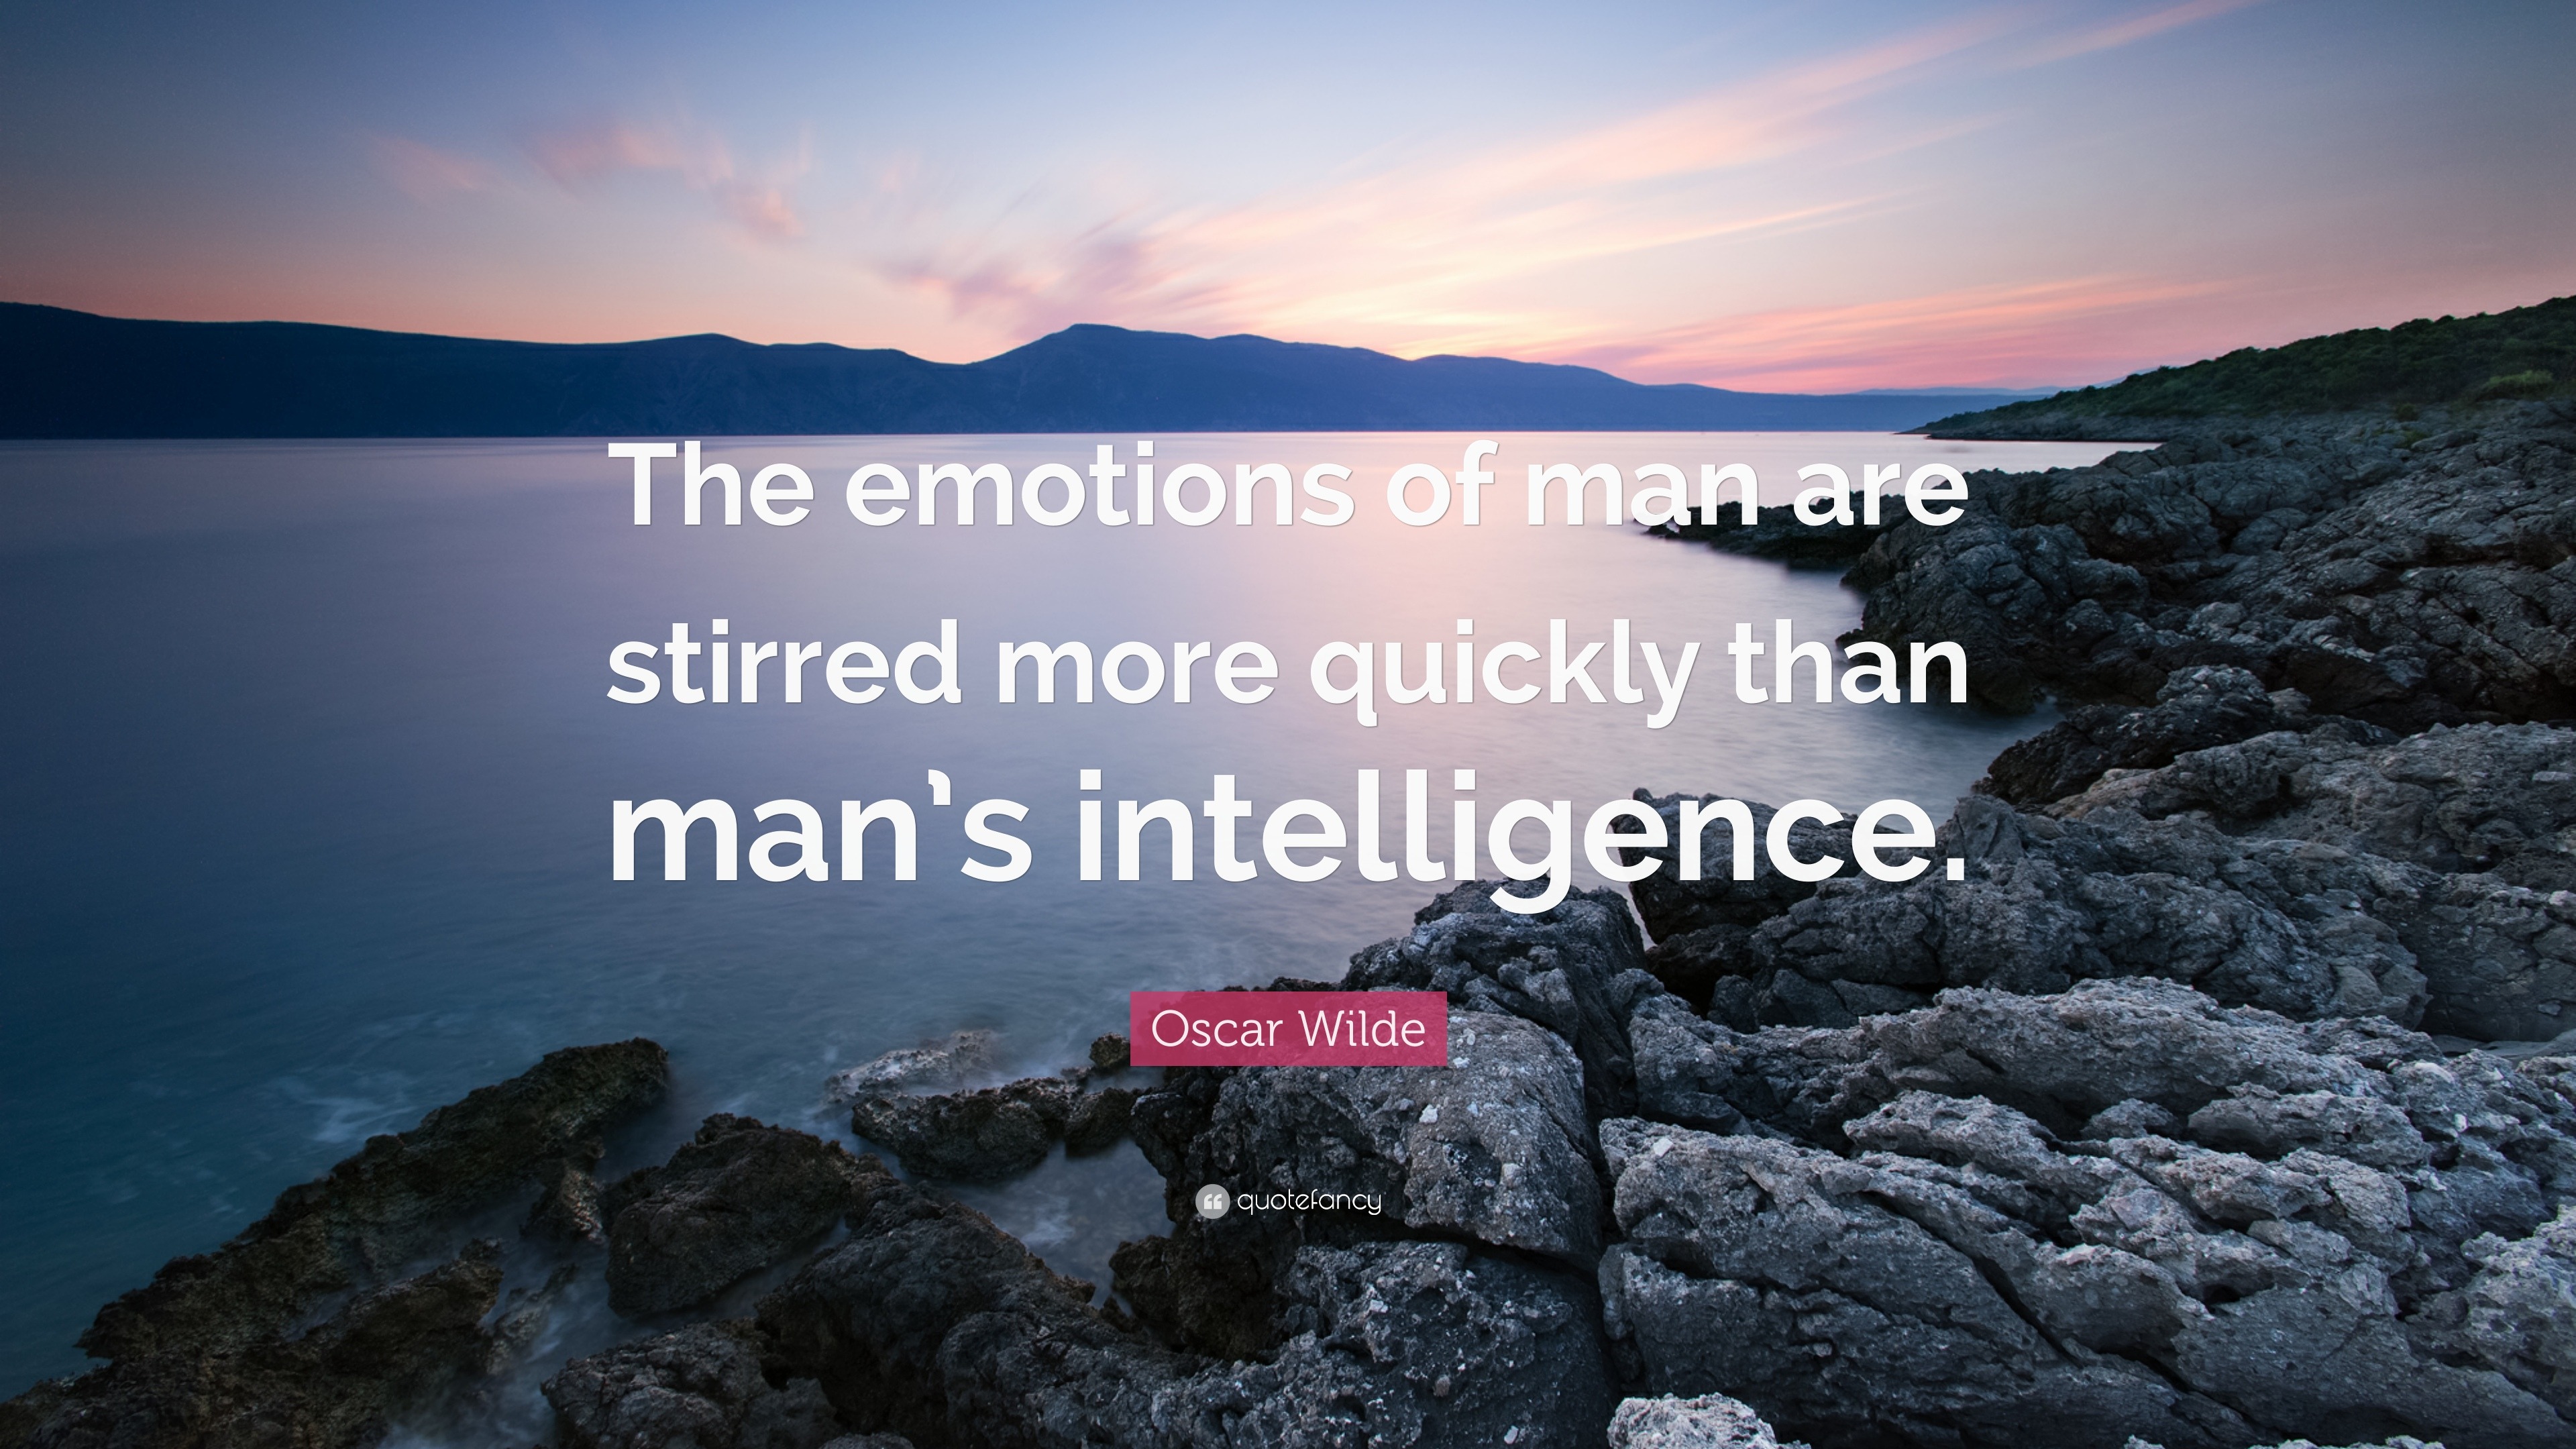 Oscar Wilde Quote The Emotions Of Man Are Stirred More Quickly Than Man S Intelligence